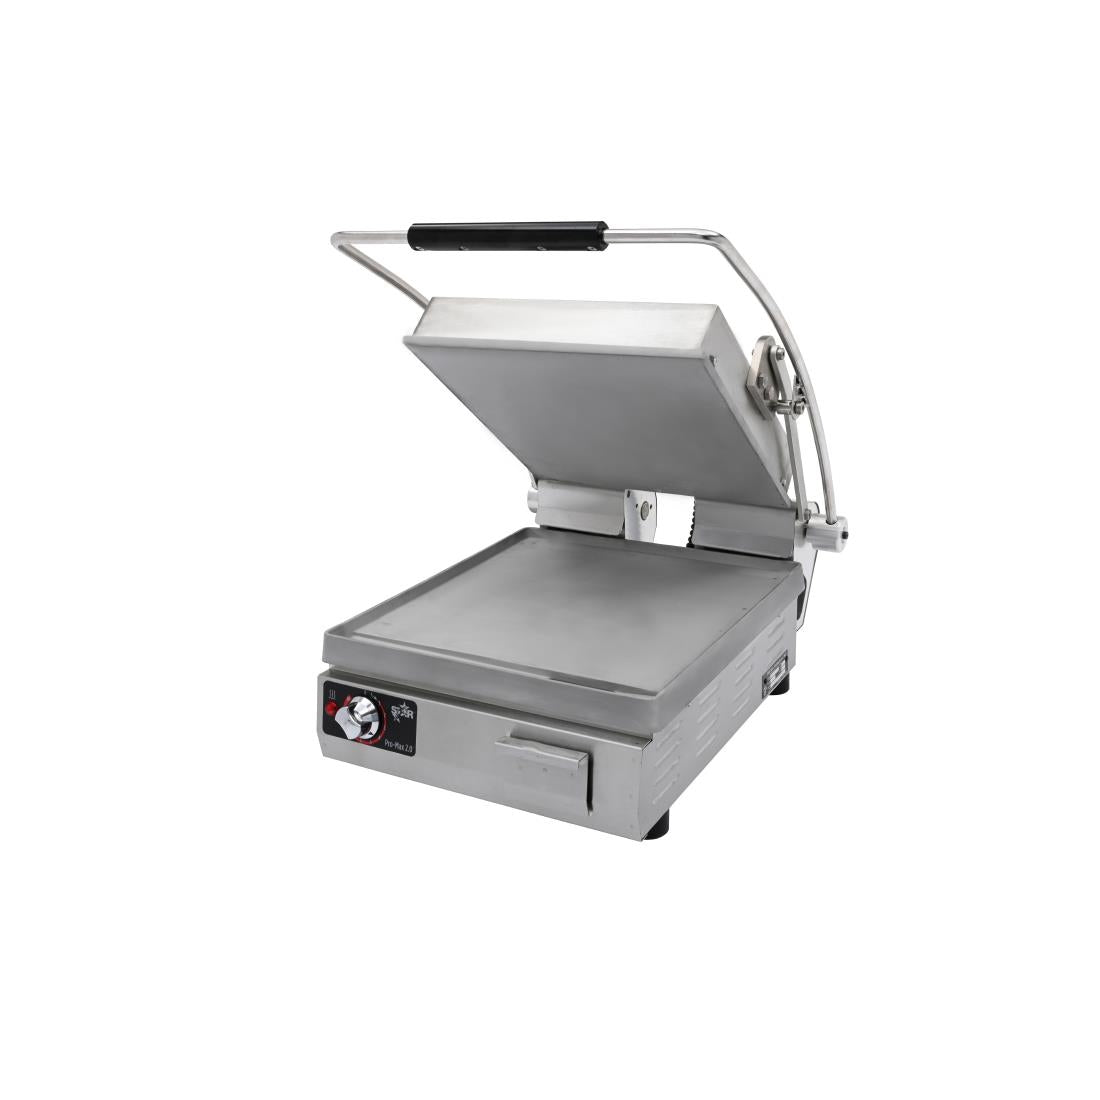 CH240 Star Pro-Max Smooth Panini Grill PST 14 JD Catering Equipment Solutions Ltd